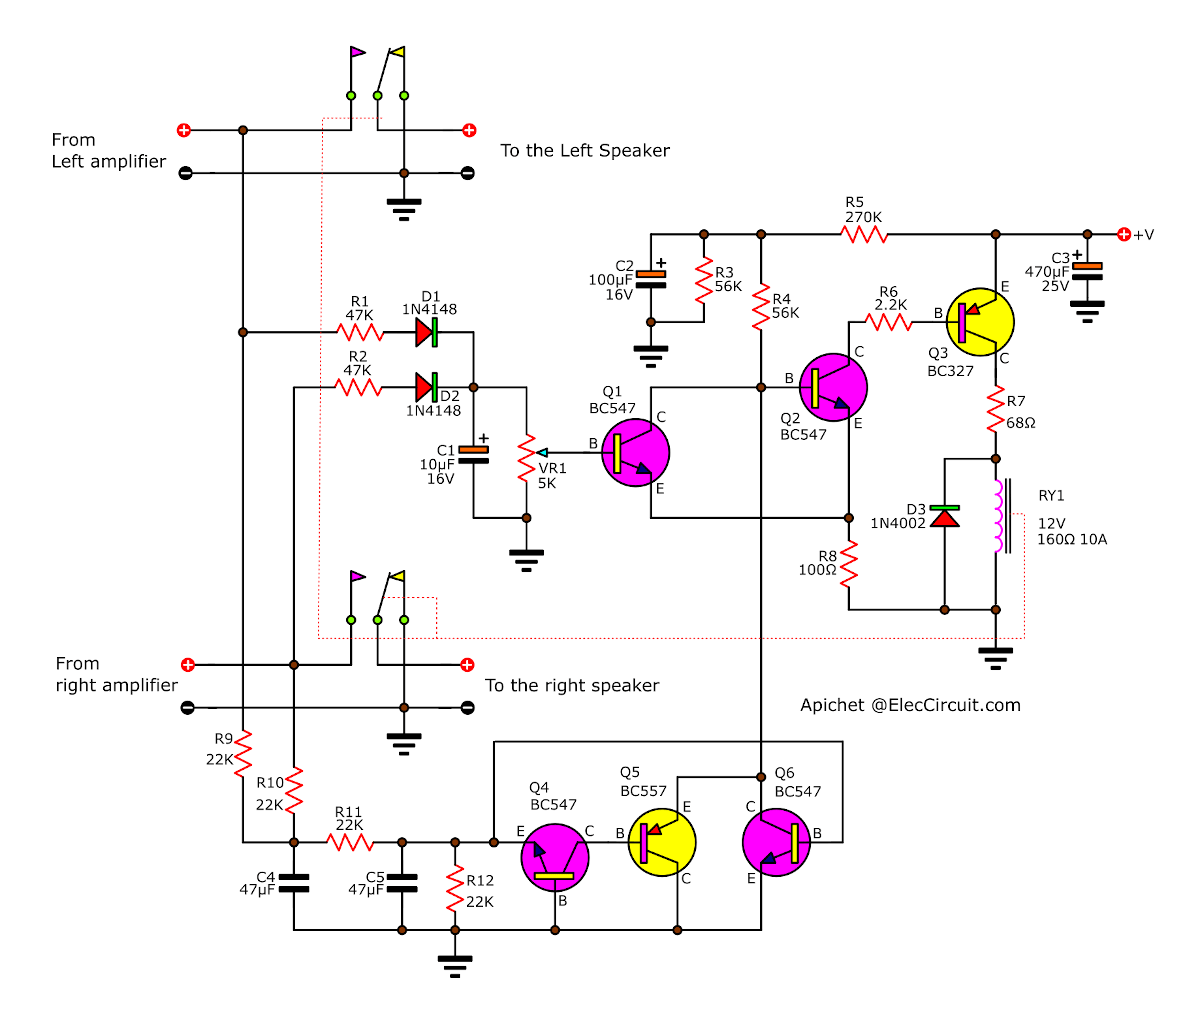 Speaker protection circuit with PCB layout - ElecCircuit.com